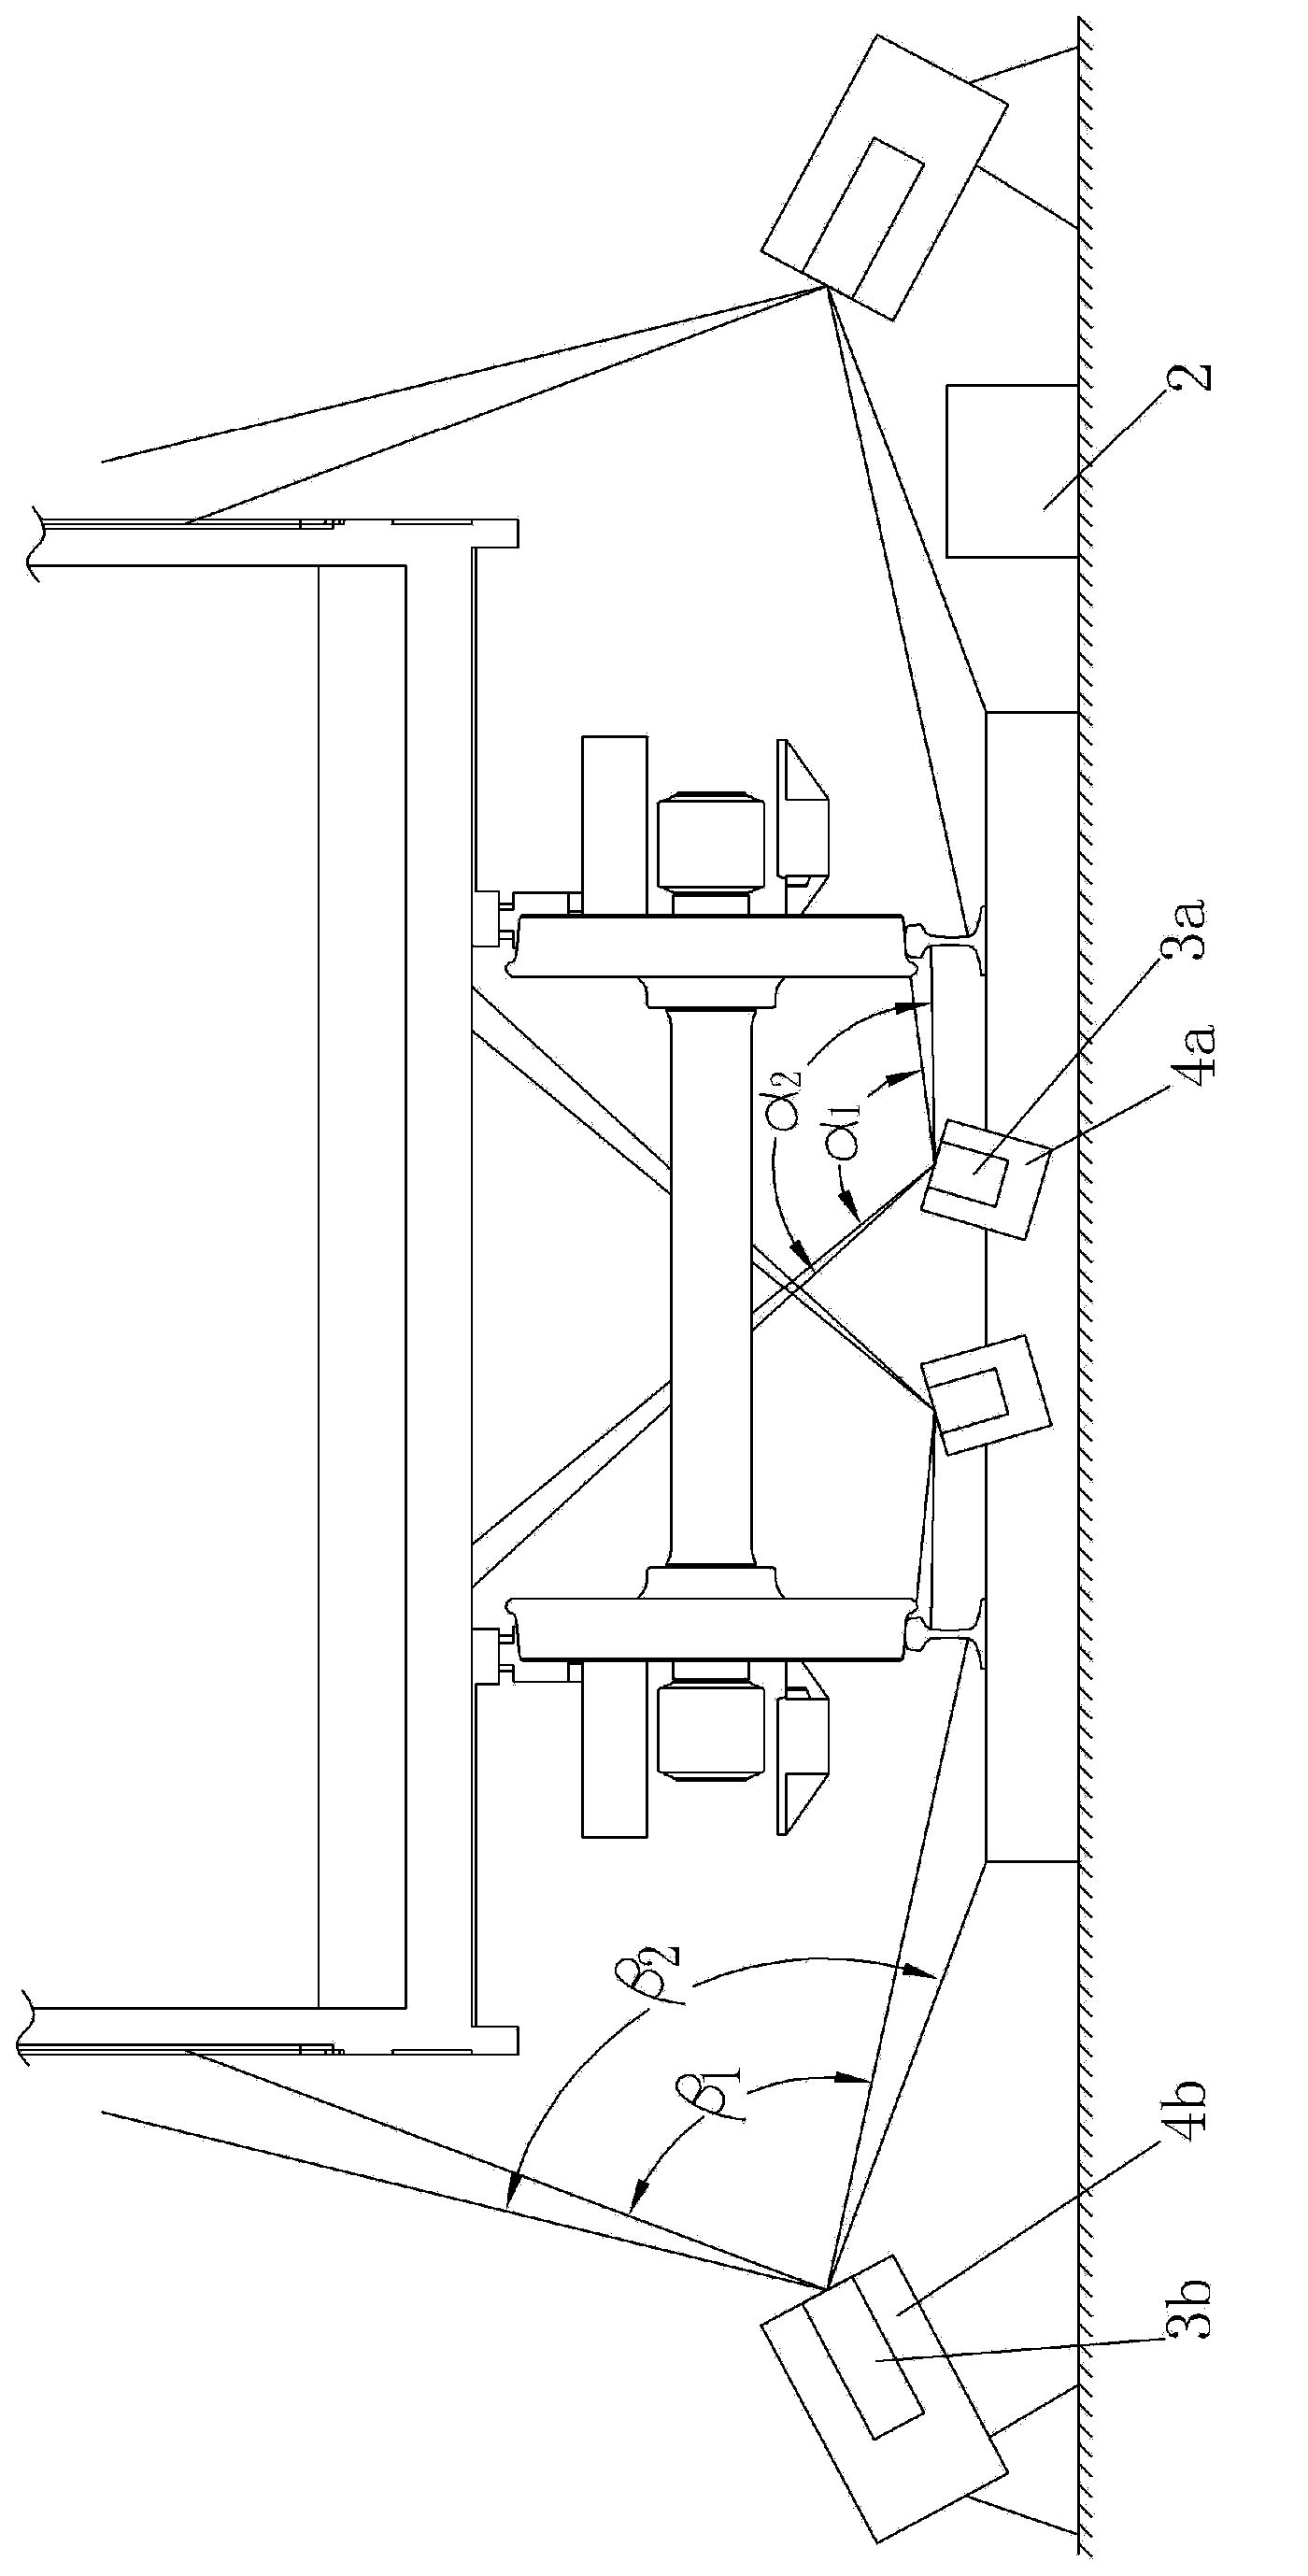 Imaging and temperature measuring device for bogie and underframe of running train